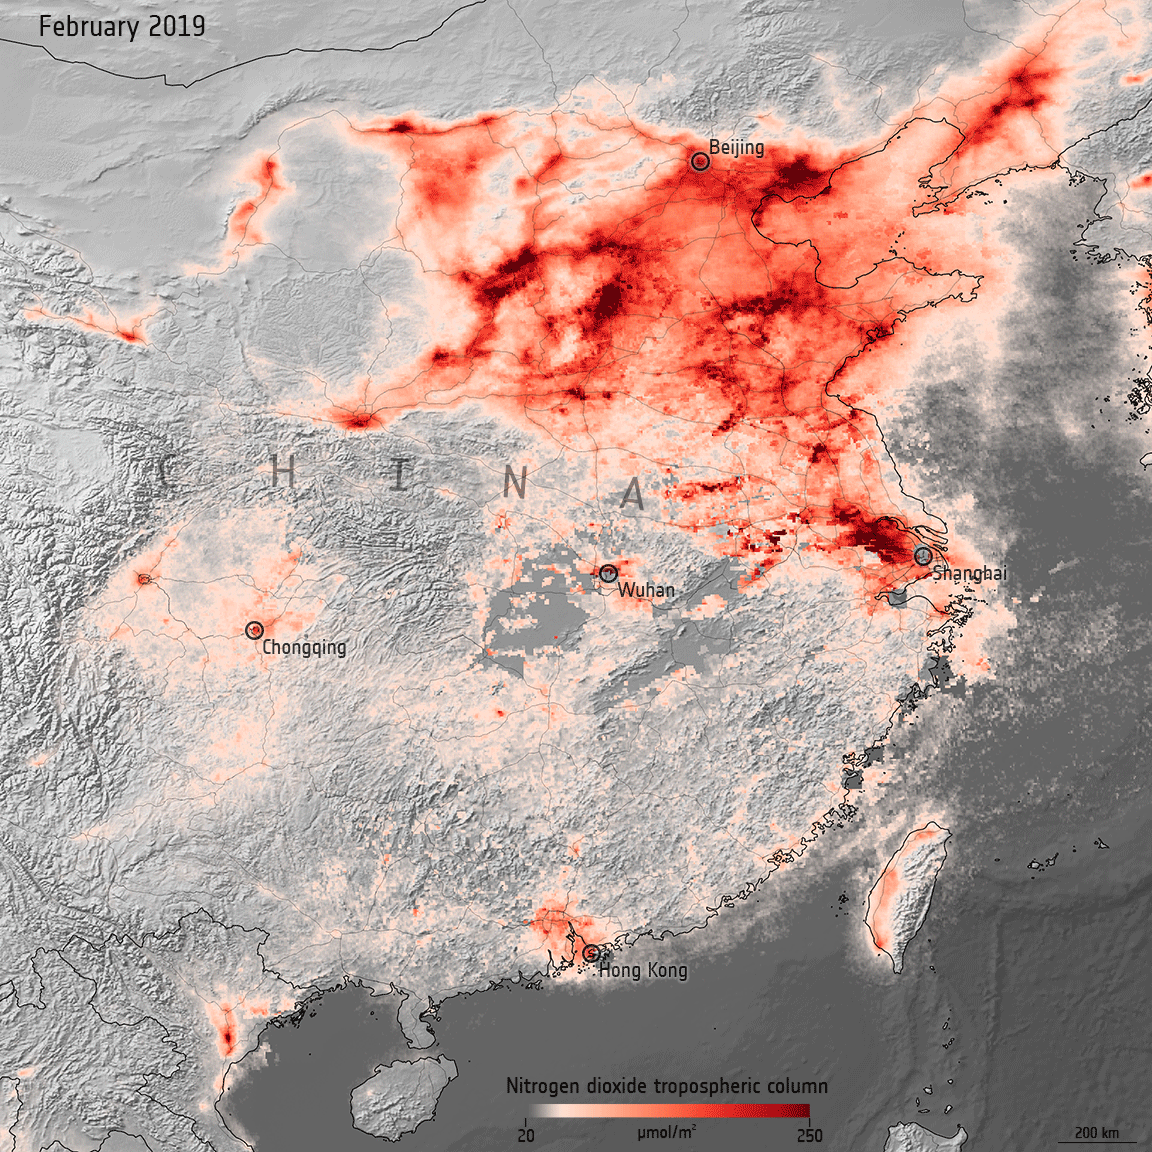 Nitrogen dioxide concentrations over China in February 2019, 2020, and 2021